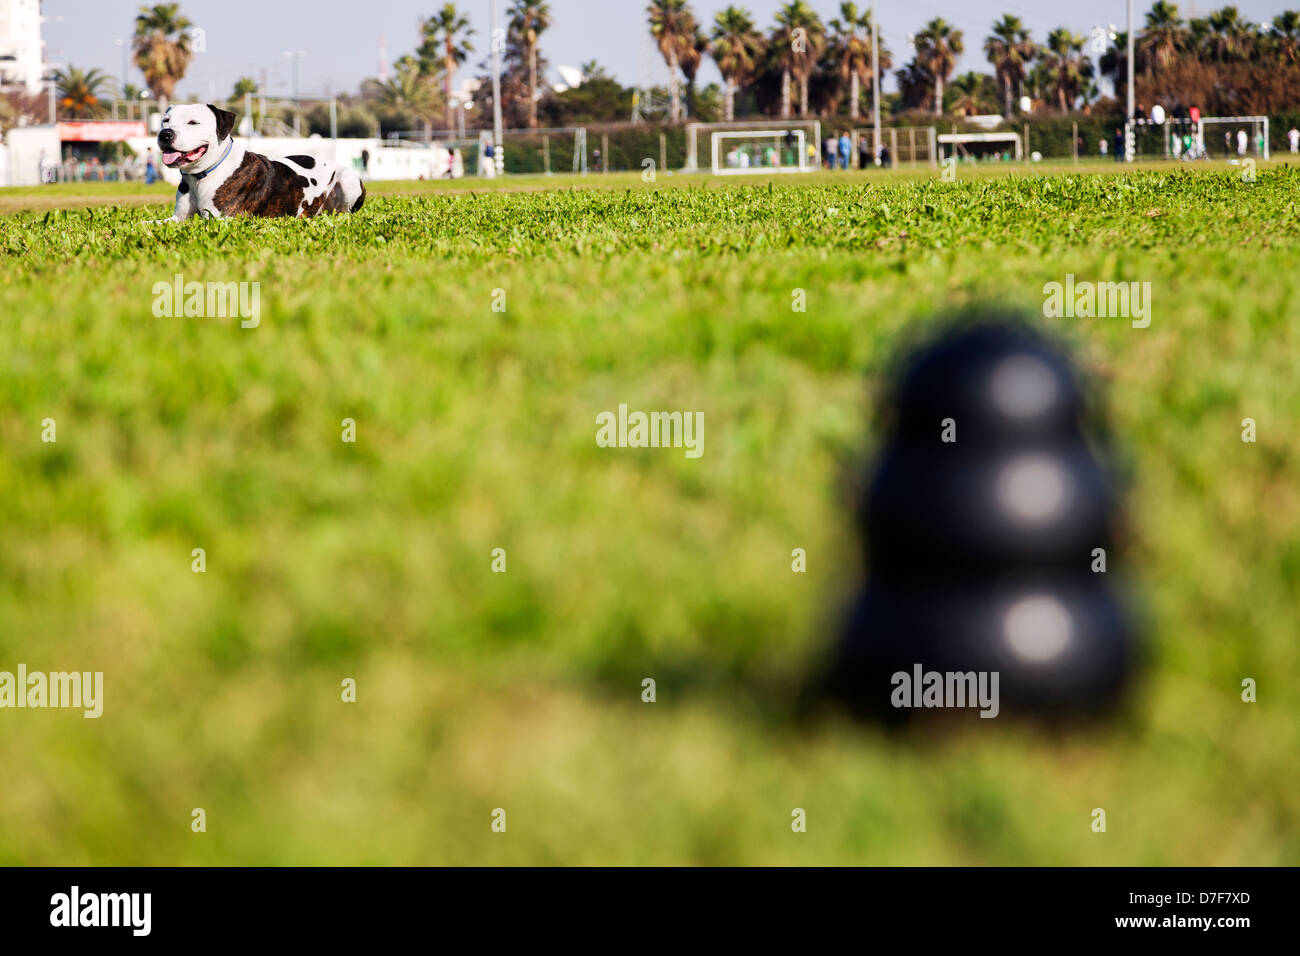 A blurred black dog toy at the front of the frame, with a Pitbull sitting in its proximity, resting for a bit. Stock Photo